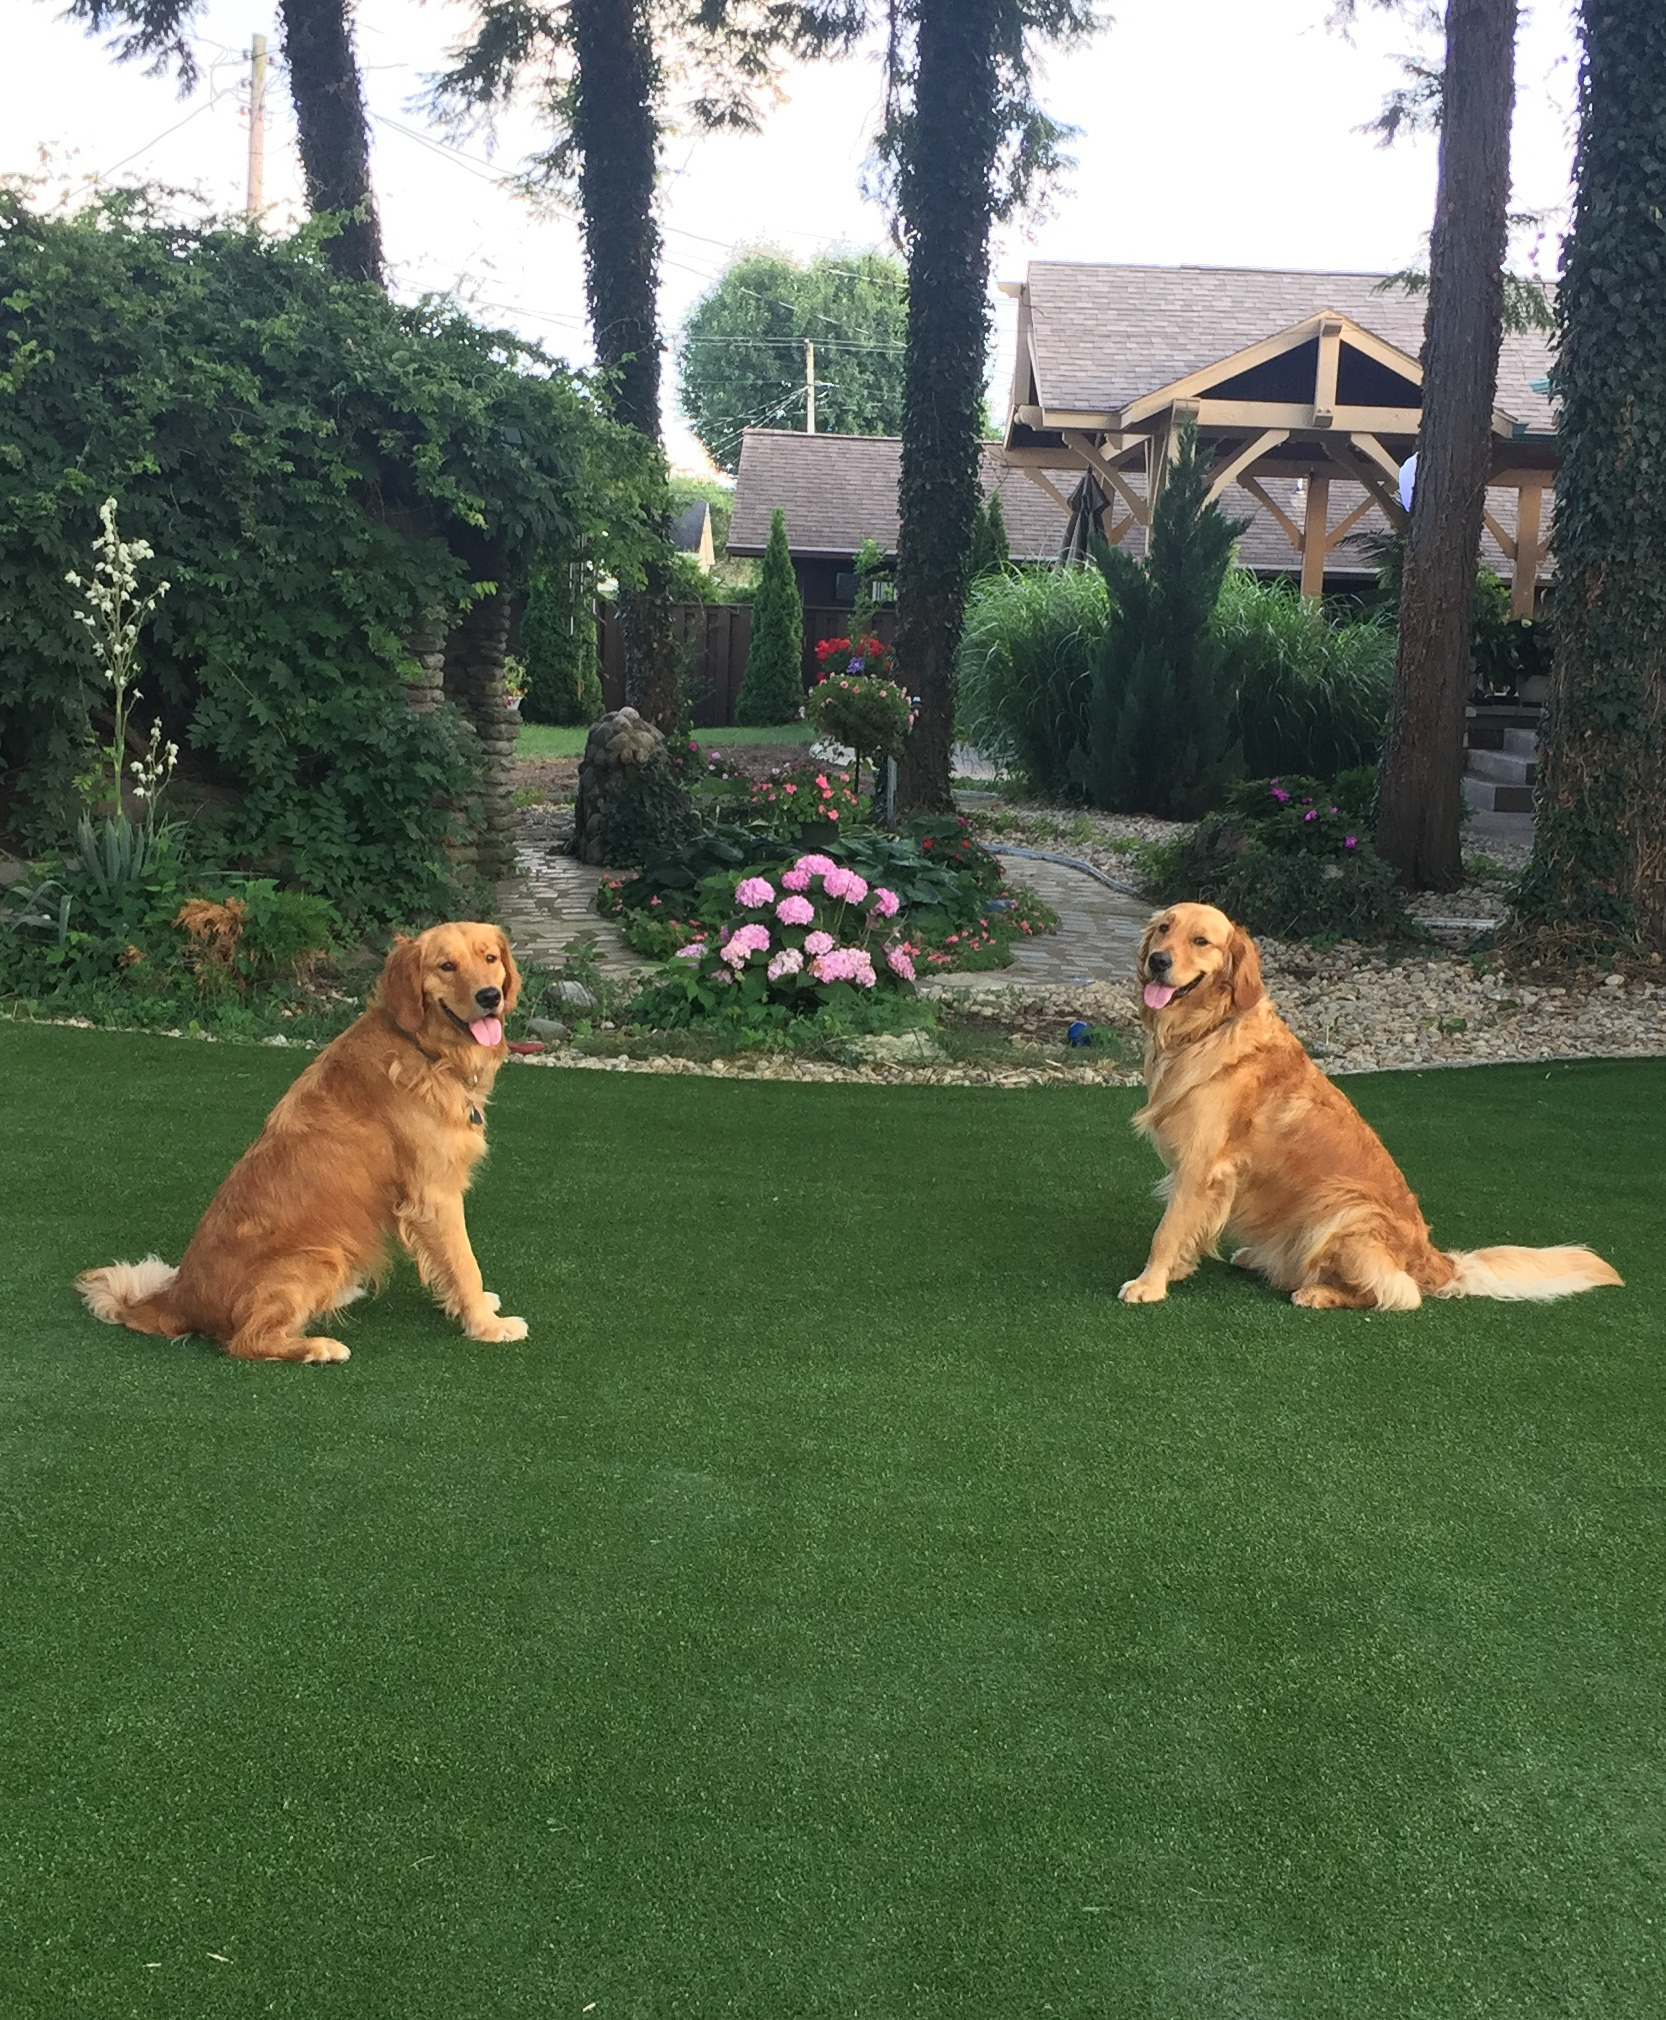 Dogs on lawn